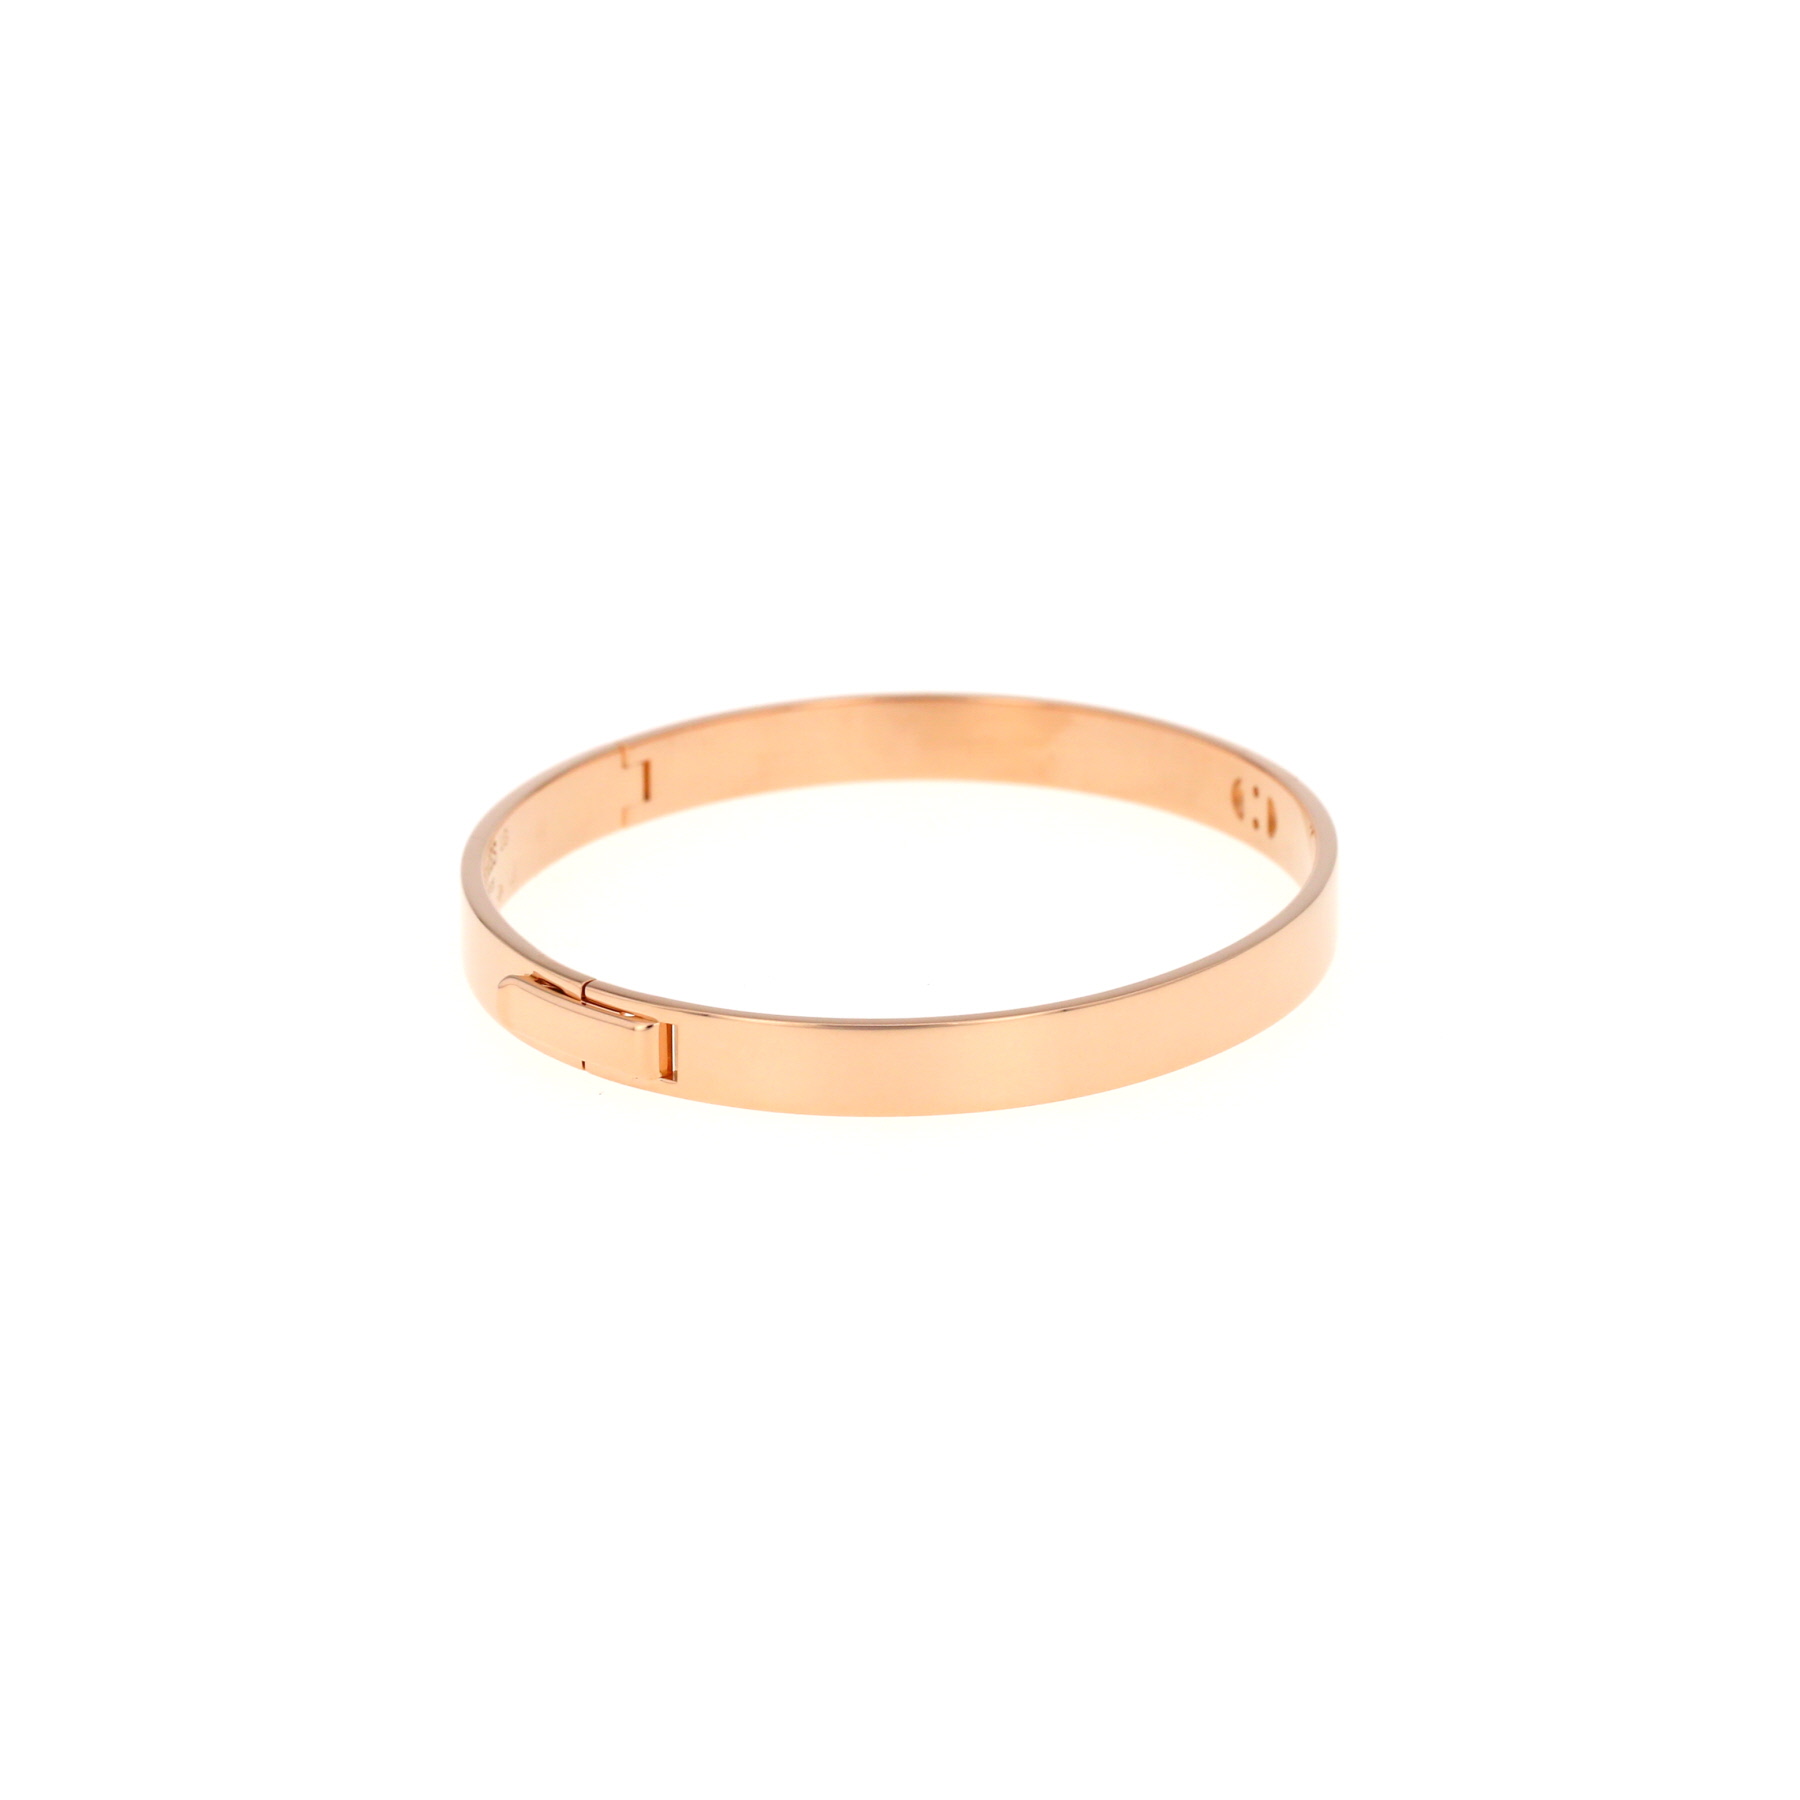 H D'ancre Bracelet In Pink And Diamonds